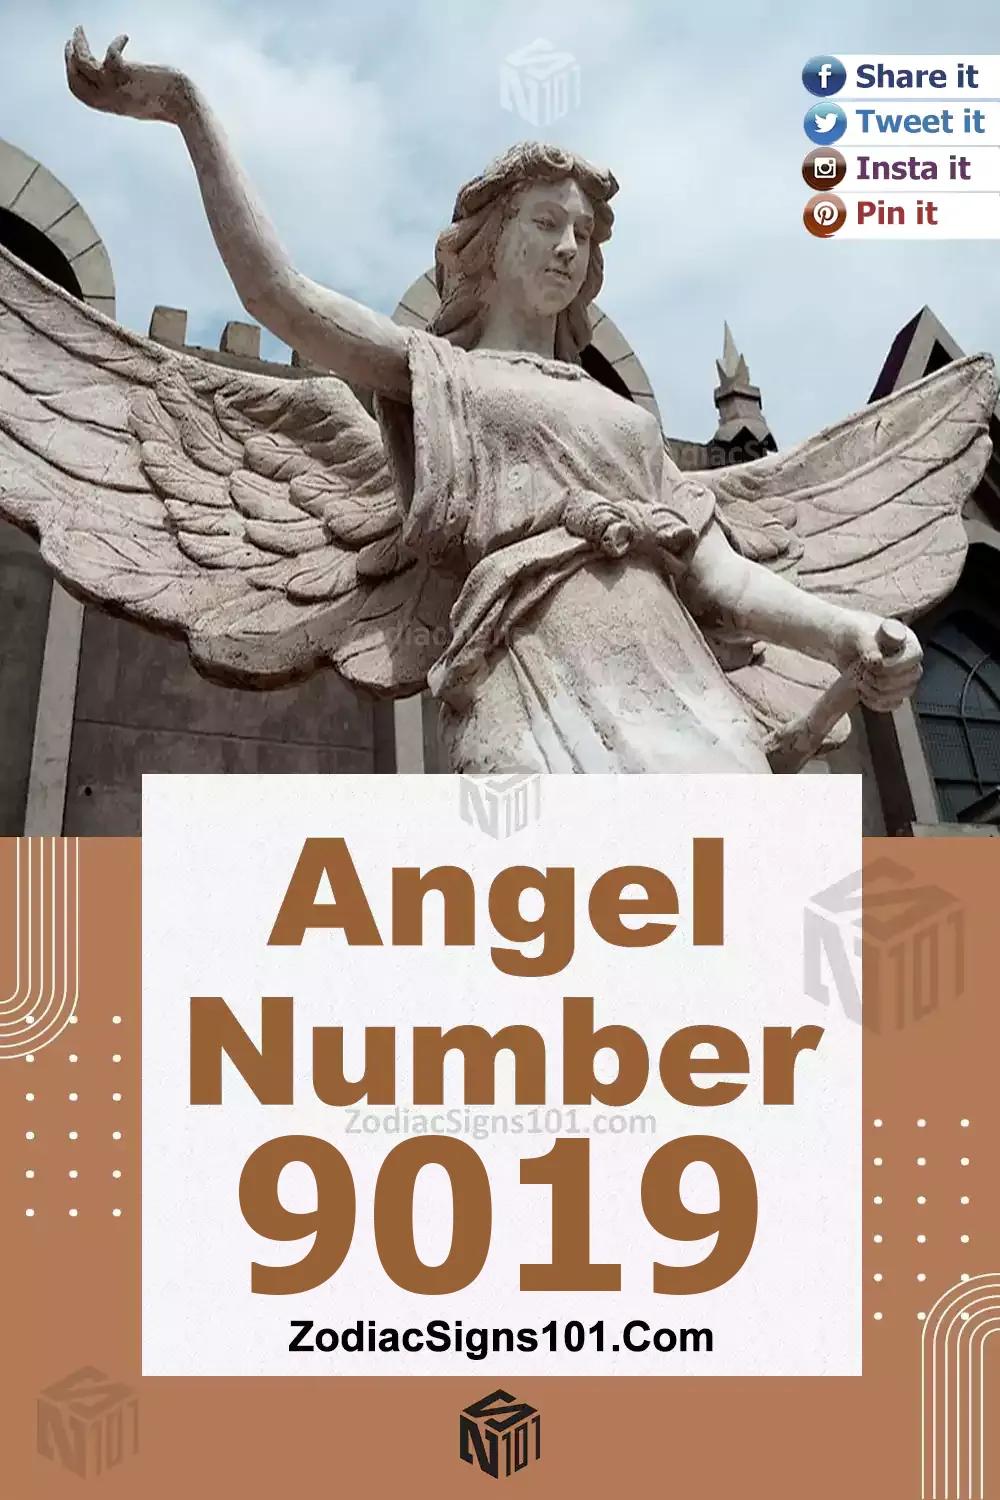 9019 Angel Number Meaning